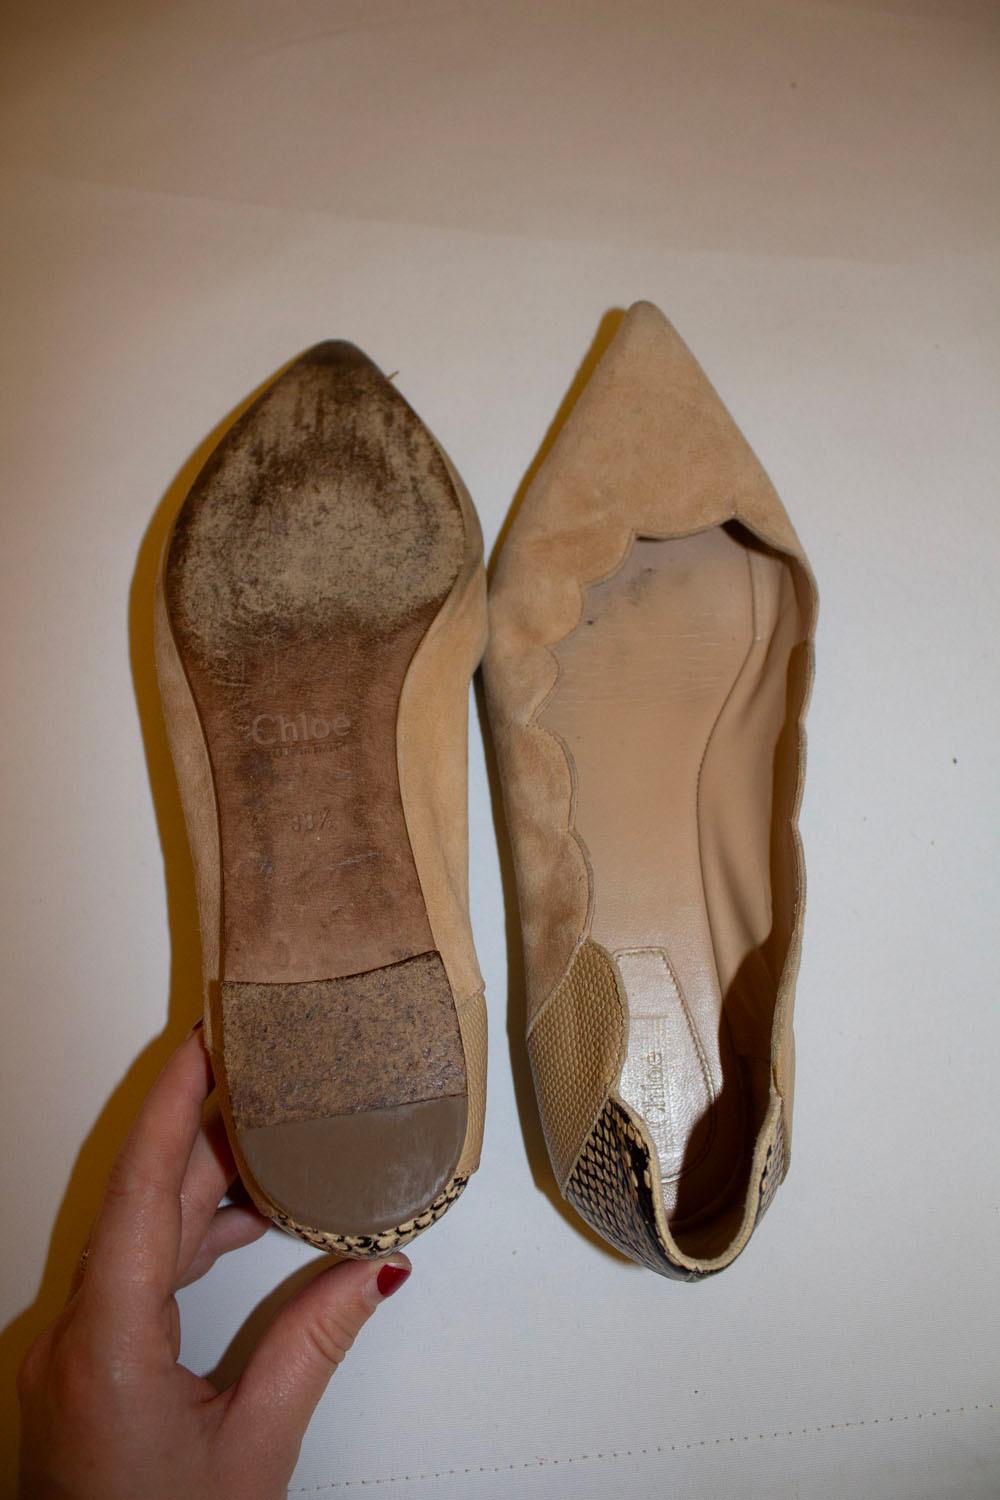 Women's Chloe Suede and Snakeskin Flats For Sale